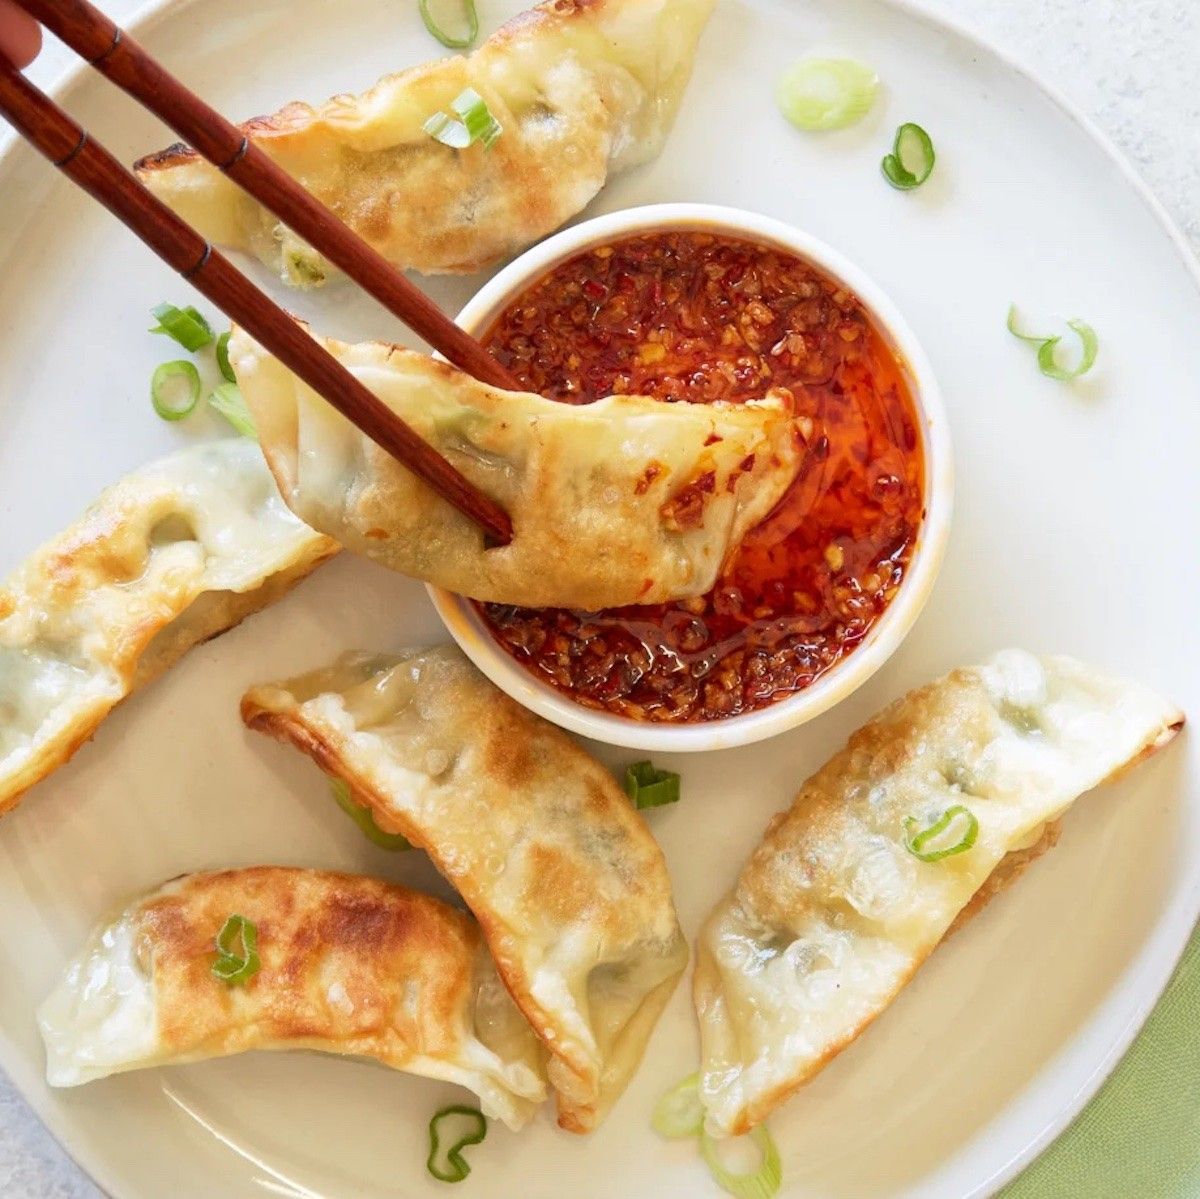 Trader Joe's Snacks potstickers and sweet and spicy sauce